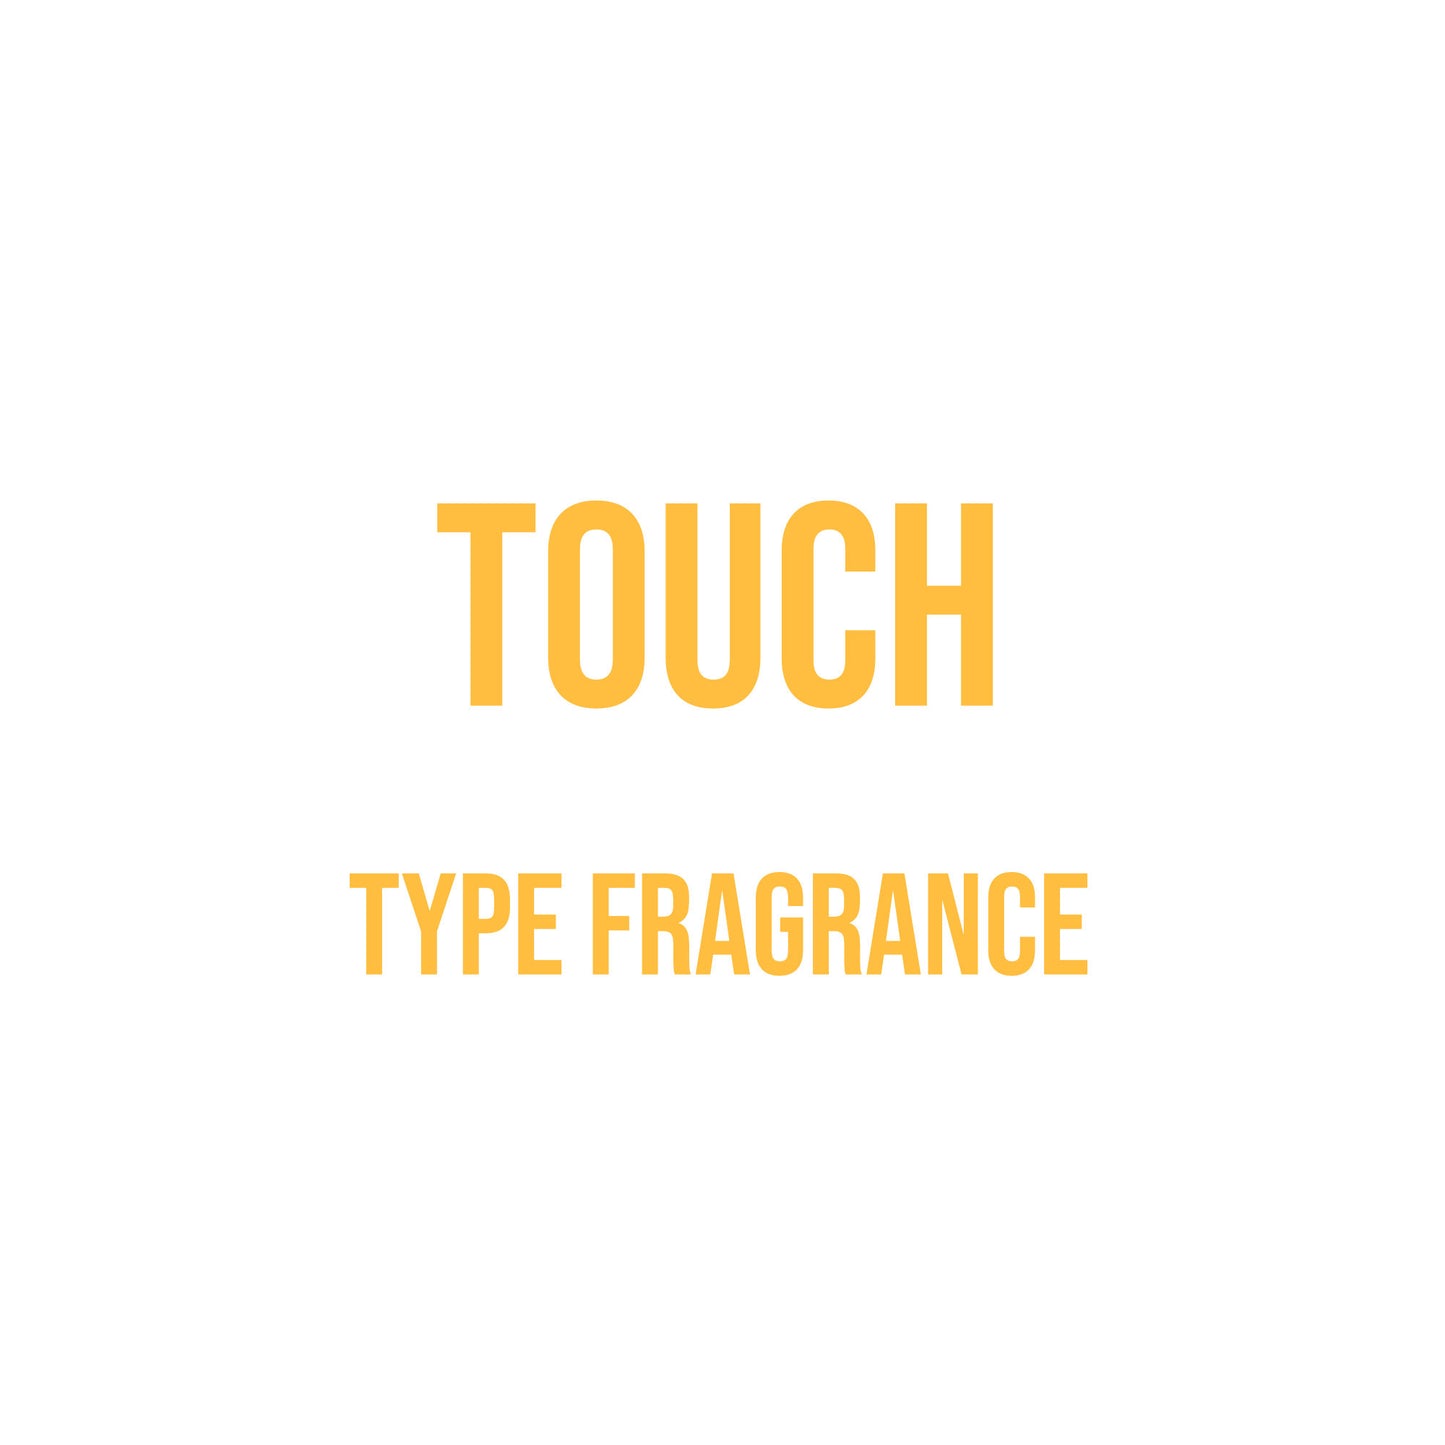 Touch Type Fragrance